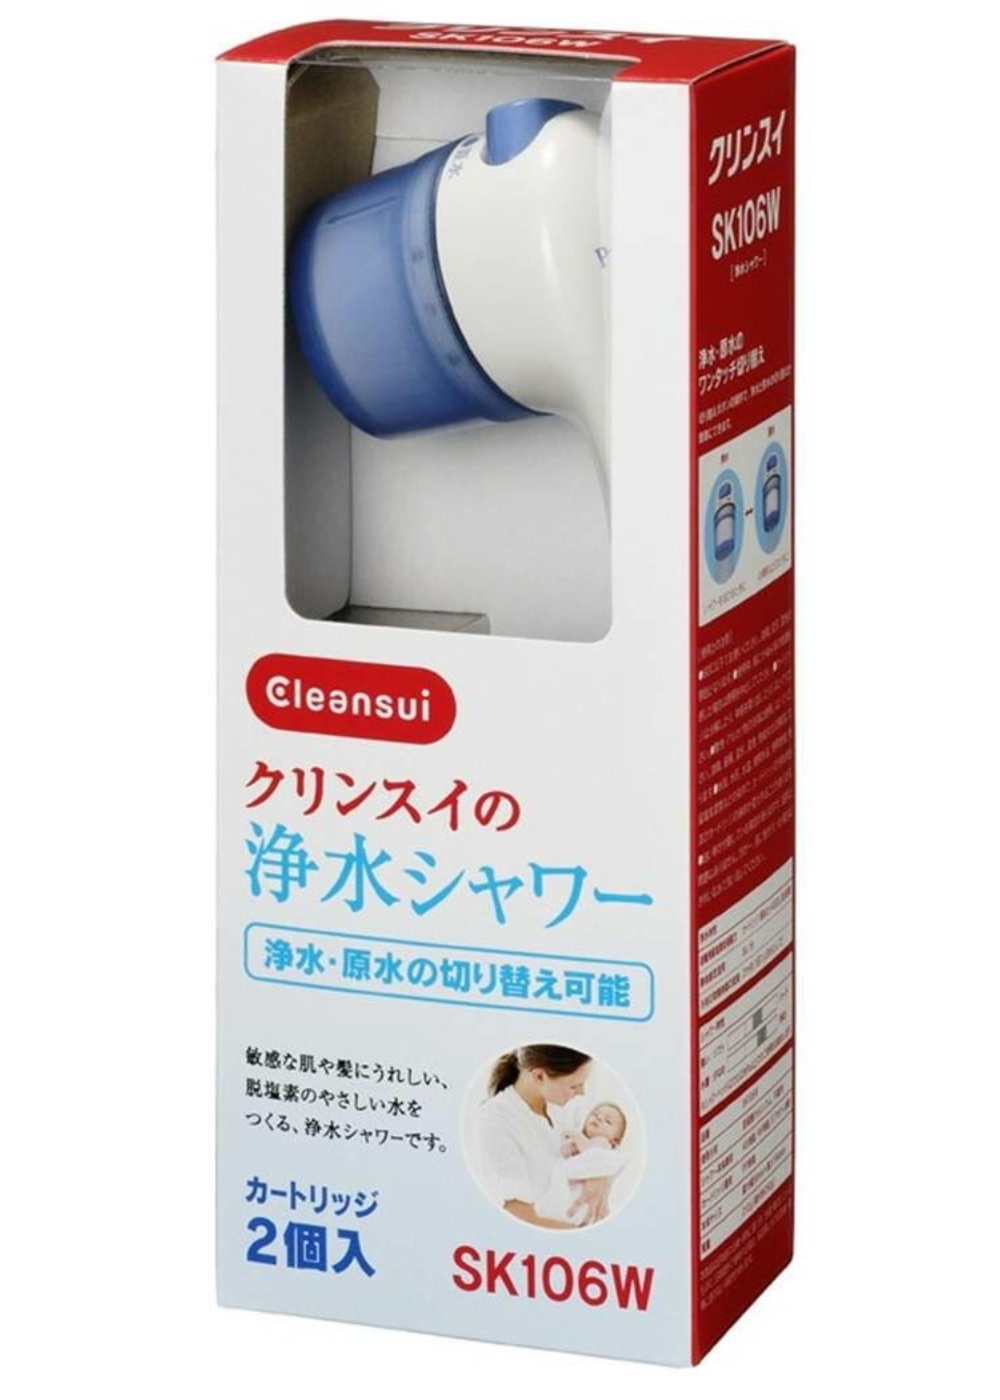 Cleansui Showerhead - Hair Loss in Japan: The Causes—and Solutions